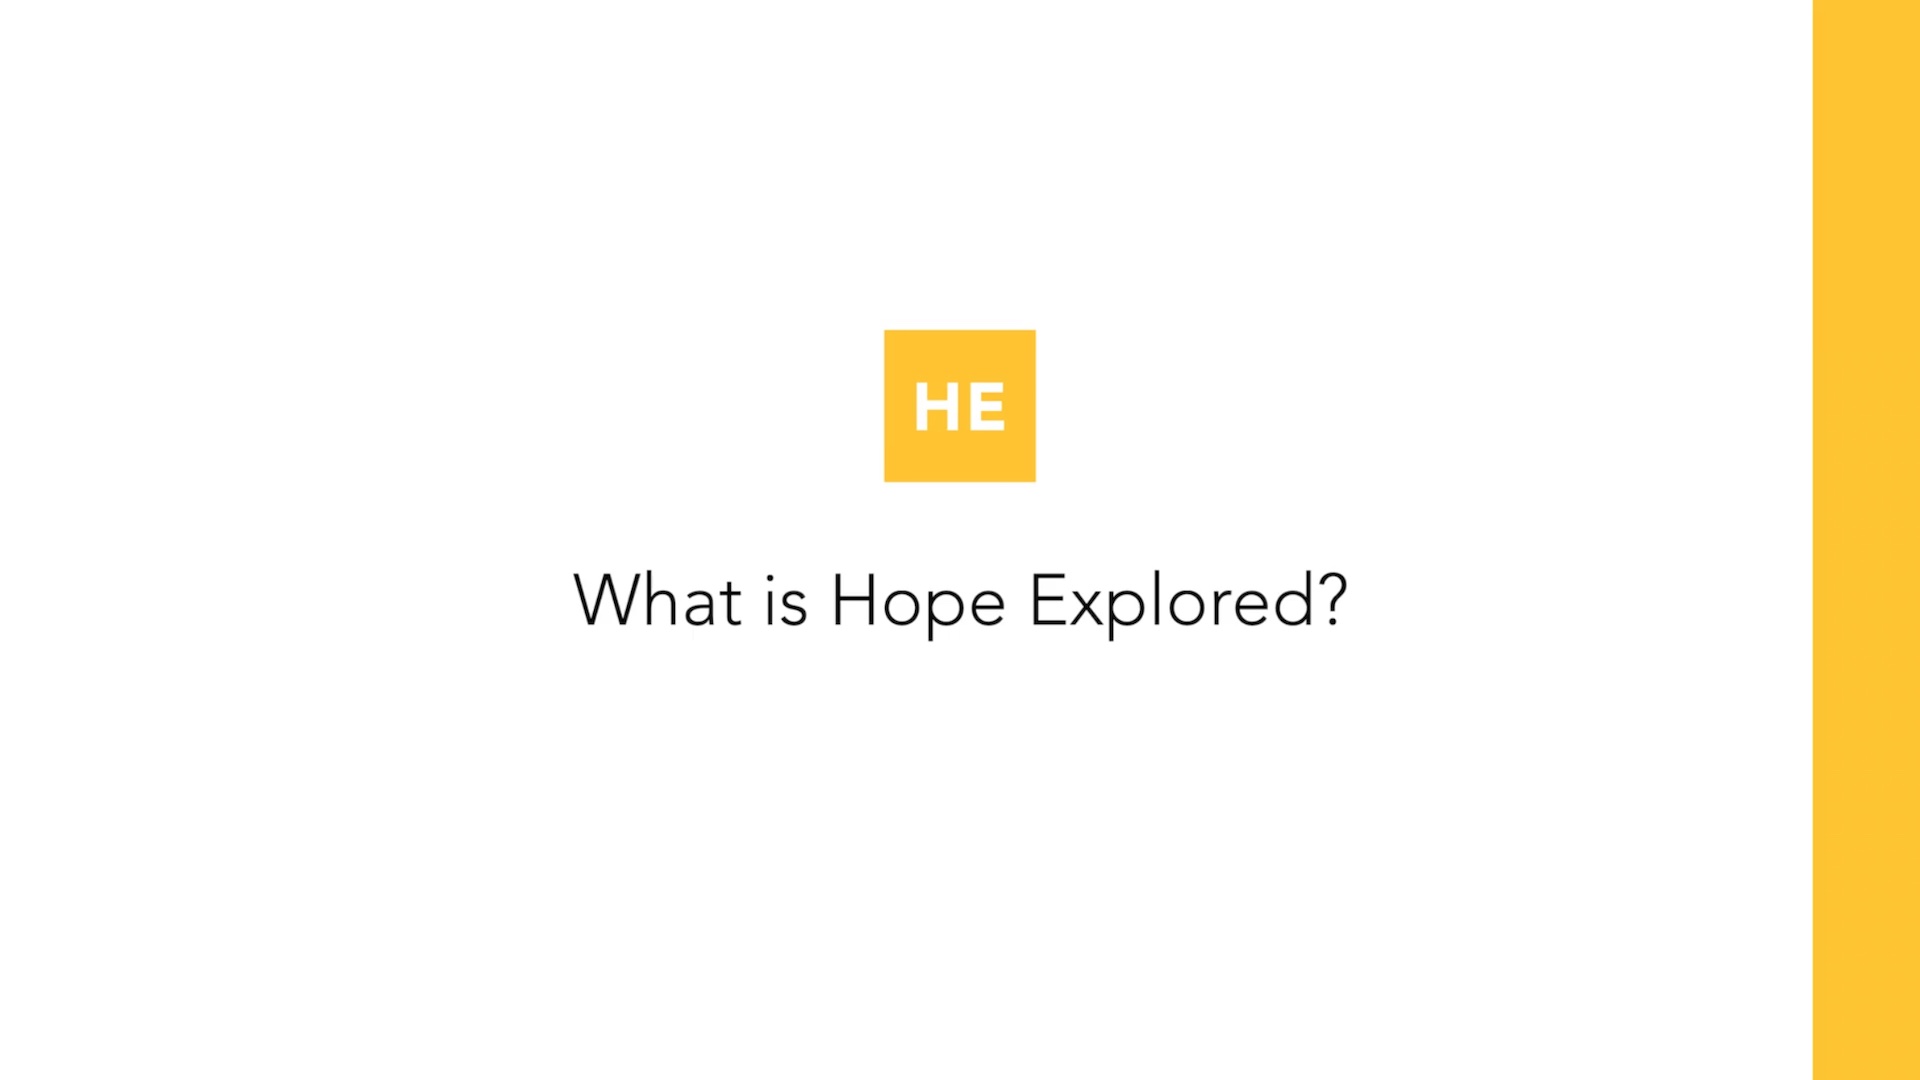 What is Hope Explored?